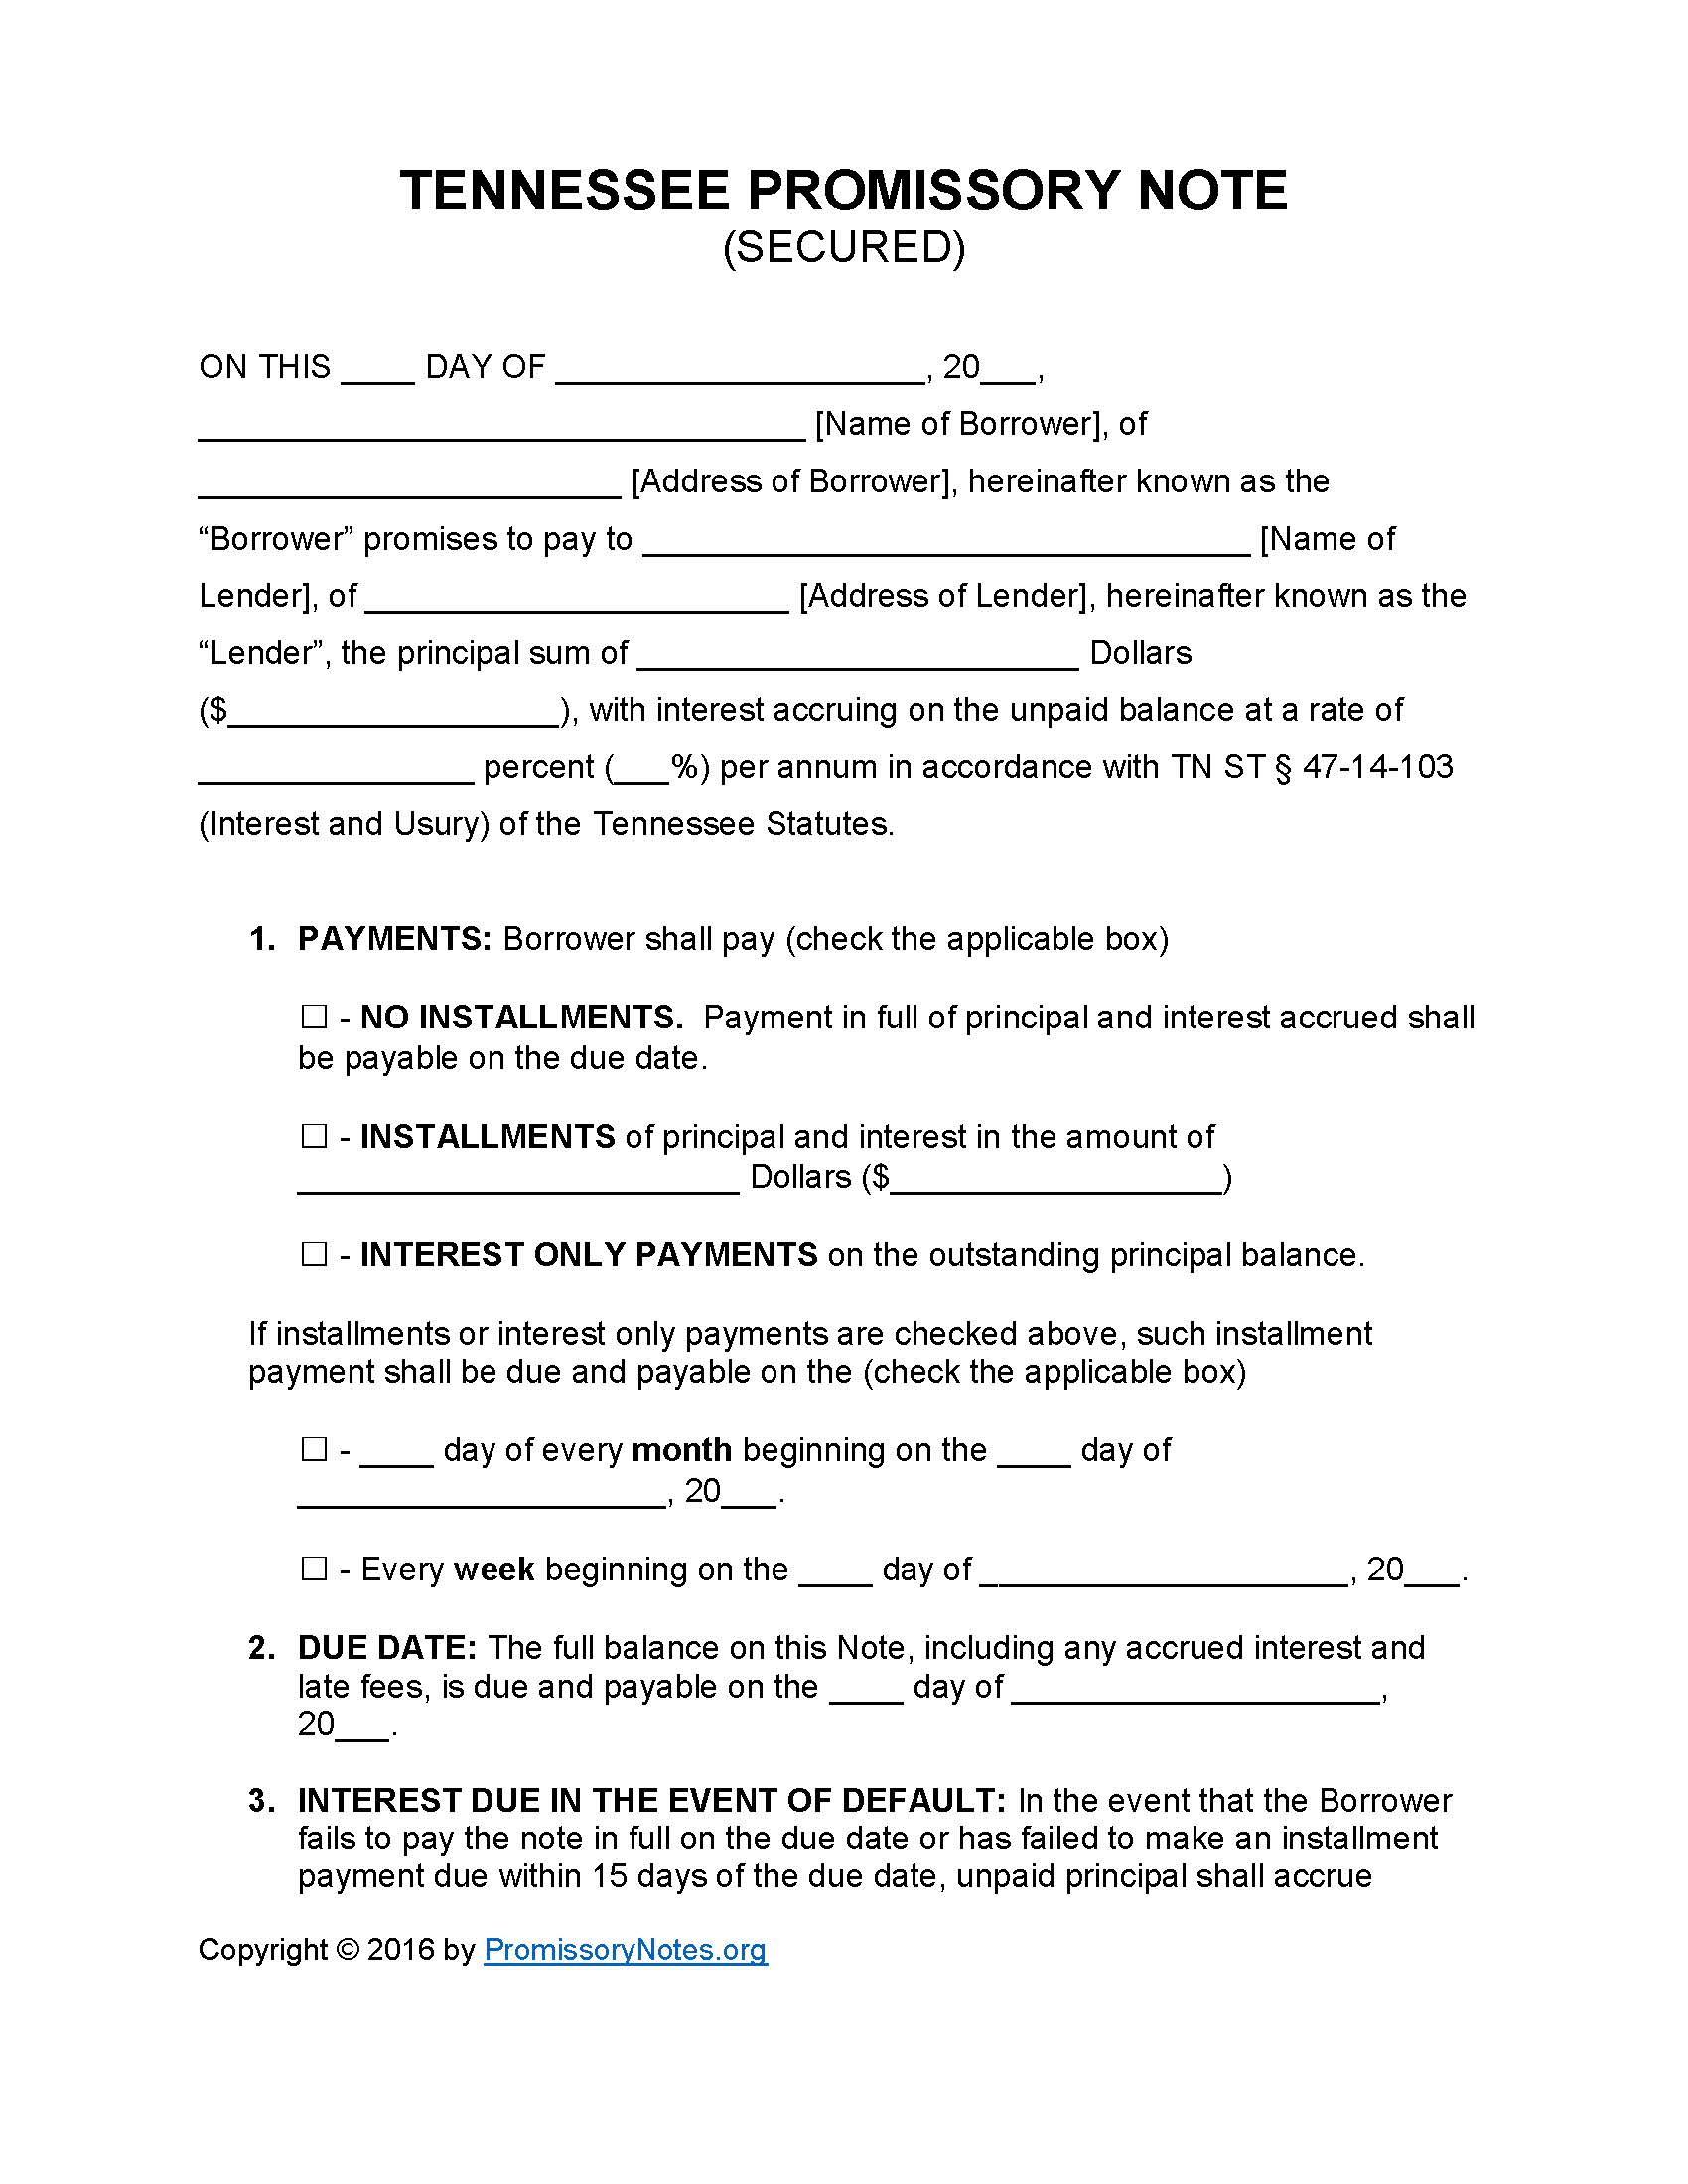 tennessee-secured-promissory-note-form